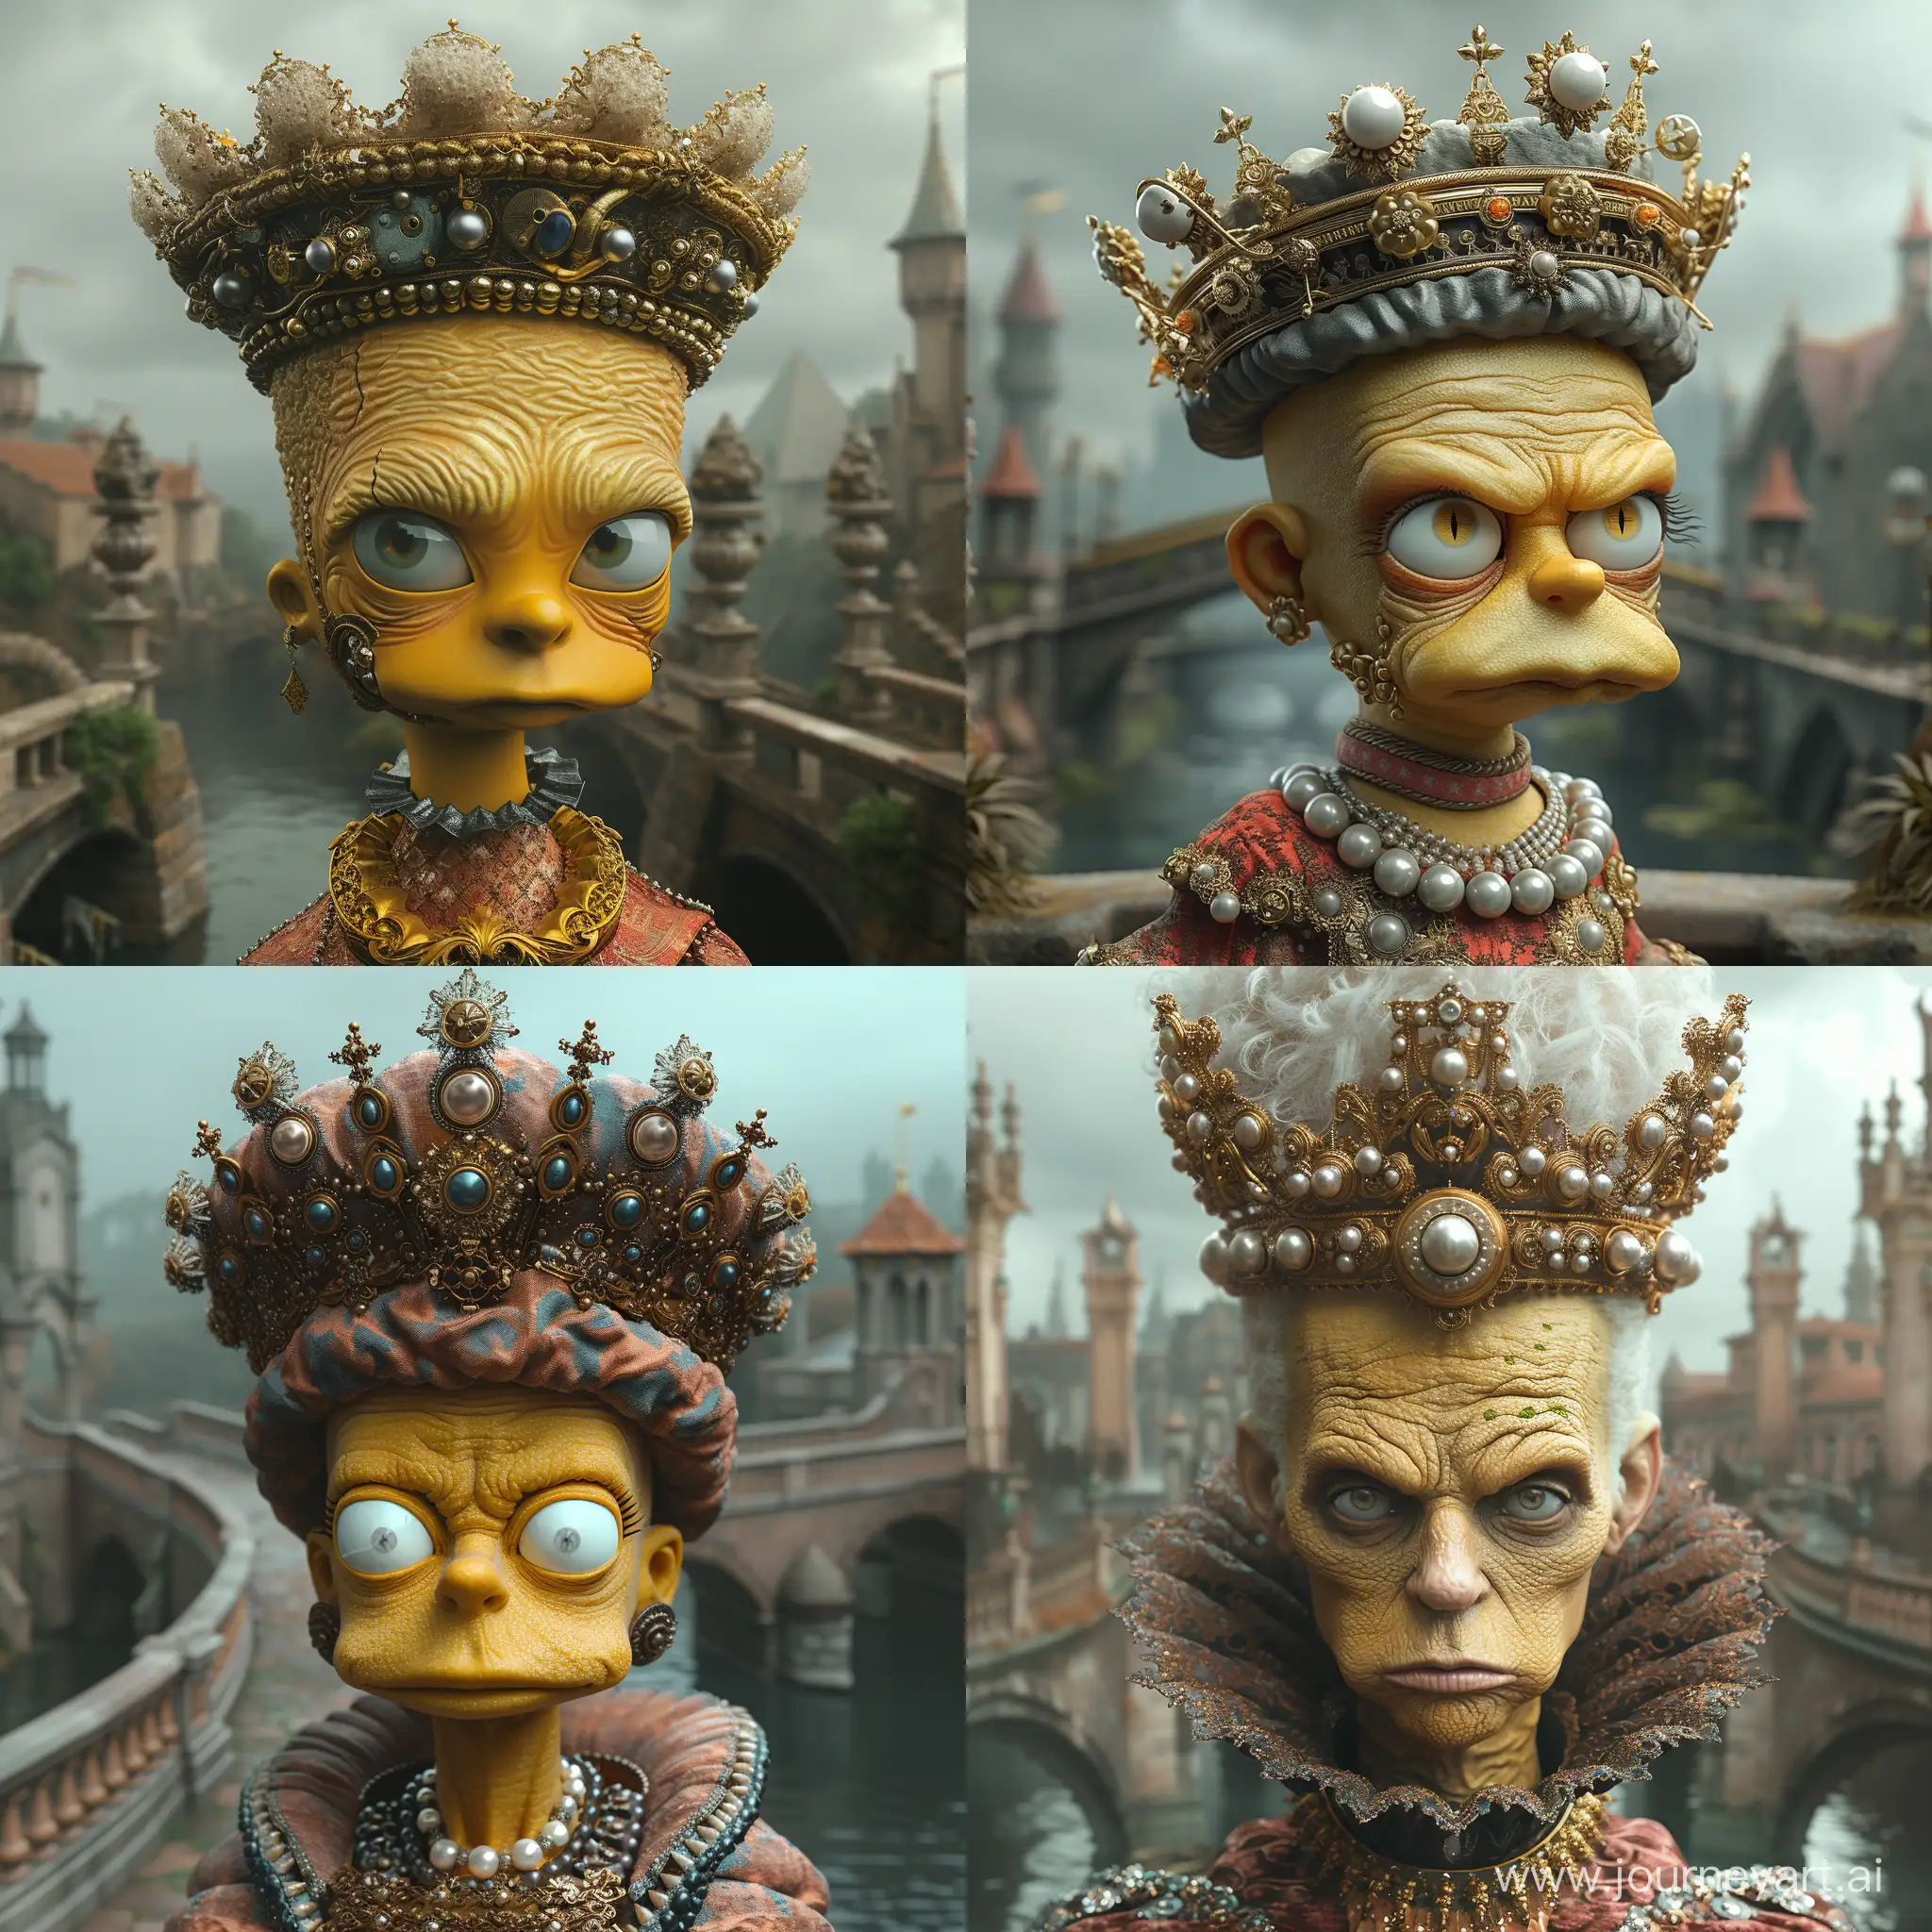  highly stylized, digitally-created Bart Simpson with fantastical elements. The character appears to have the following characteristics:
Yellowish, wrinkled skin that gives it an aged appearance.
Narrowed, heavy-lidded eyes with prominent dark circles, which provide a stern or perhaps weary expression.
A large, ornate headpiece that seems to be a cross between a crown and a wig, featuring intricate gold details, pearls or gemstones, and decorative elements that resemble plant life or coral.
The headpiece appears to be adorned with mechanical elements and gears, combining the organic and ornate with the industrial, hinting at a steampunk-inspired aesthetic.
The attire and overall style suggest a regal or noble status, possibly a queen or empress, with intricate gold neckpieces and upper garments that are medieval or fantasy-inspired.
The background showcases a gloomy, atmospheric landscape with gothic architecture, stone bridges, and a castle or manor in the distance, consistent with fantasy or historical settings. The environment and the character together create a sense of a fantasy realm with a somber or mystical ambiance. This is likely a piece of digital artwork rather than a depiction of a real individual. --stylize 750 --v 6